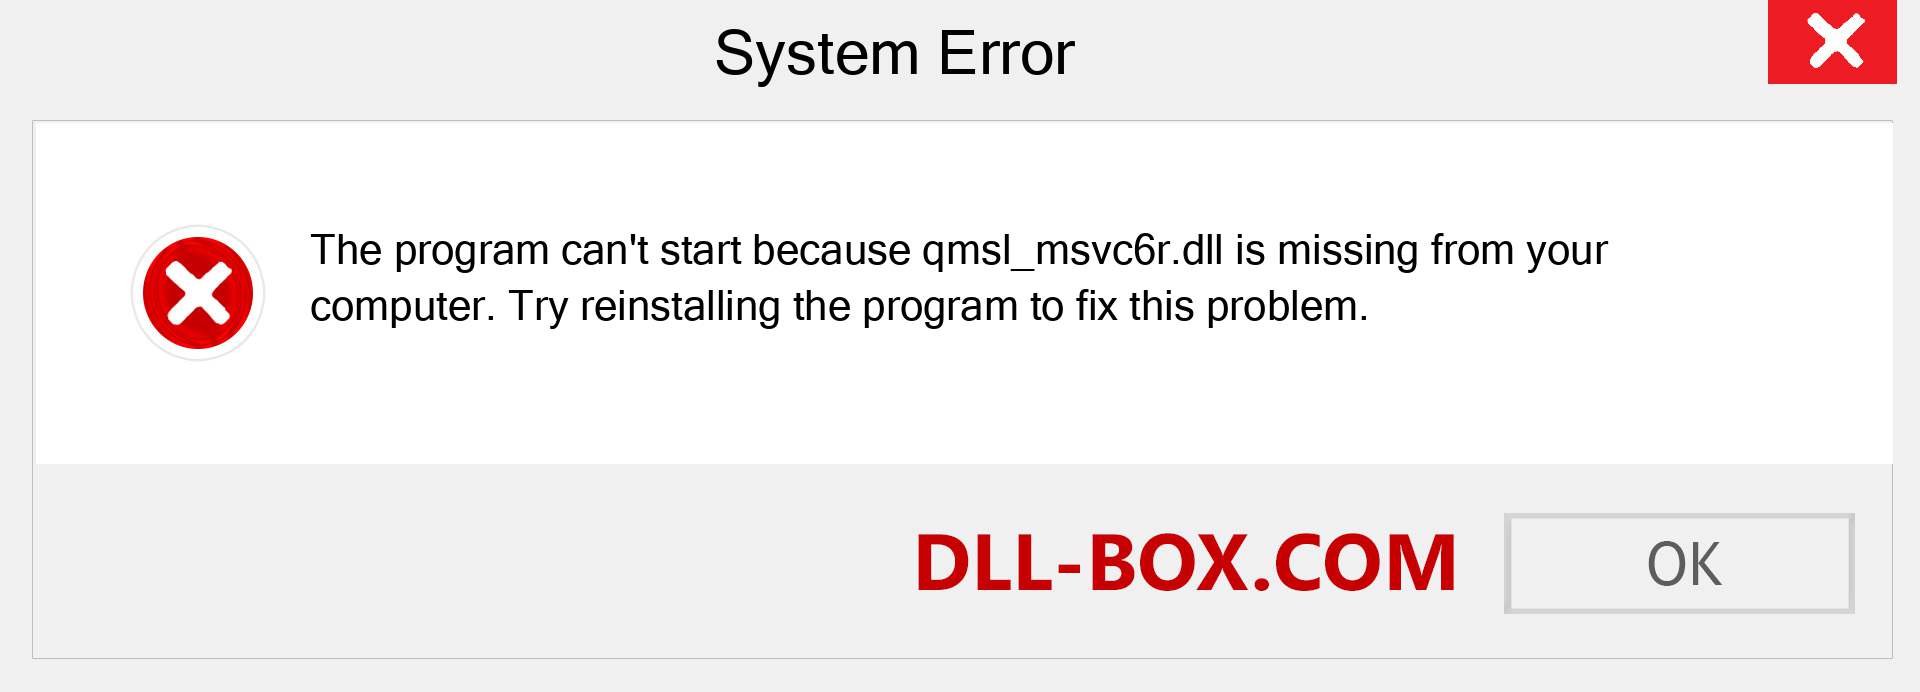  qmsl_msvc6r.dll file is missing?. Download for Windows 7, 8, 10 - Fix  qmsl_msvc6r dll Missing Error on Windows, photos, images